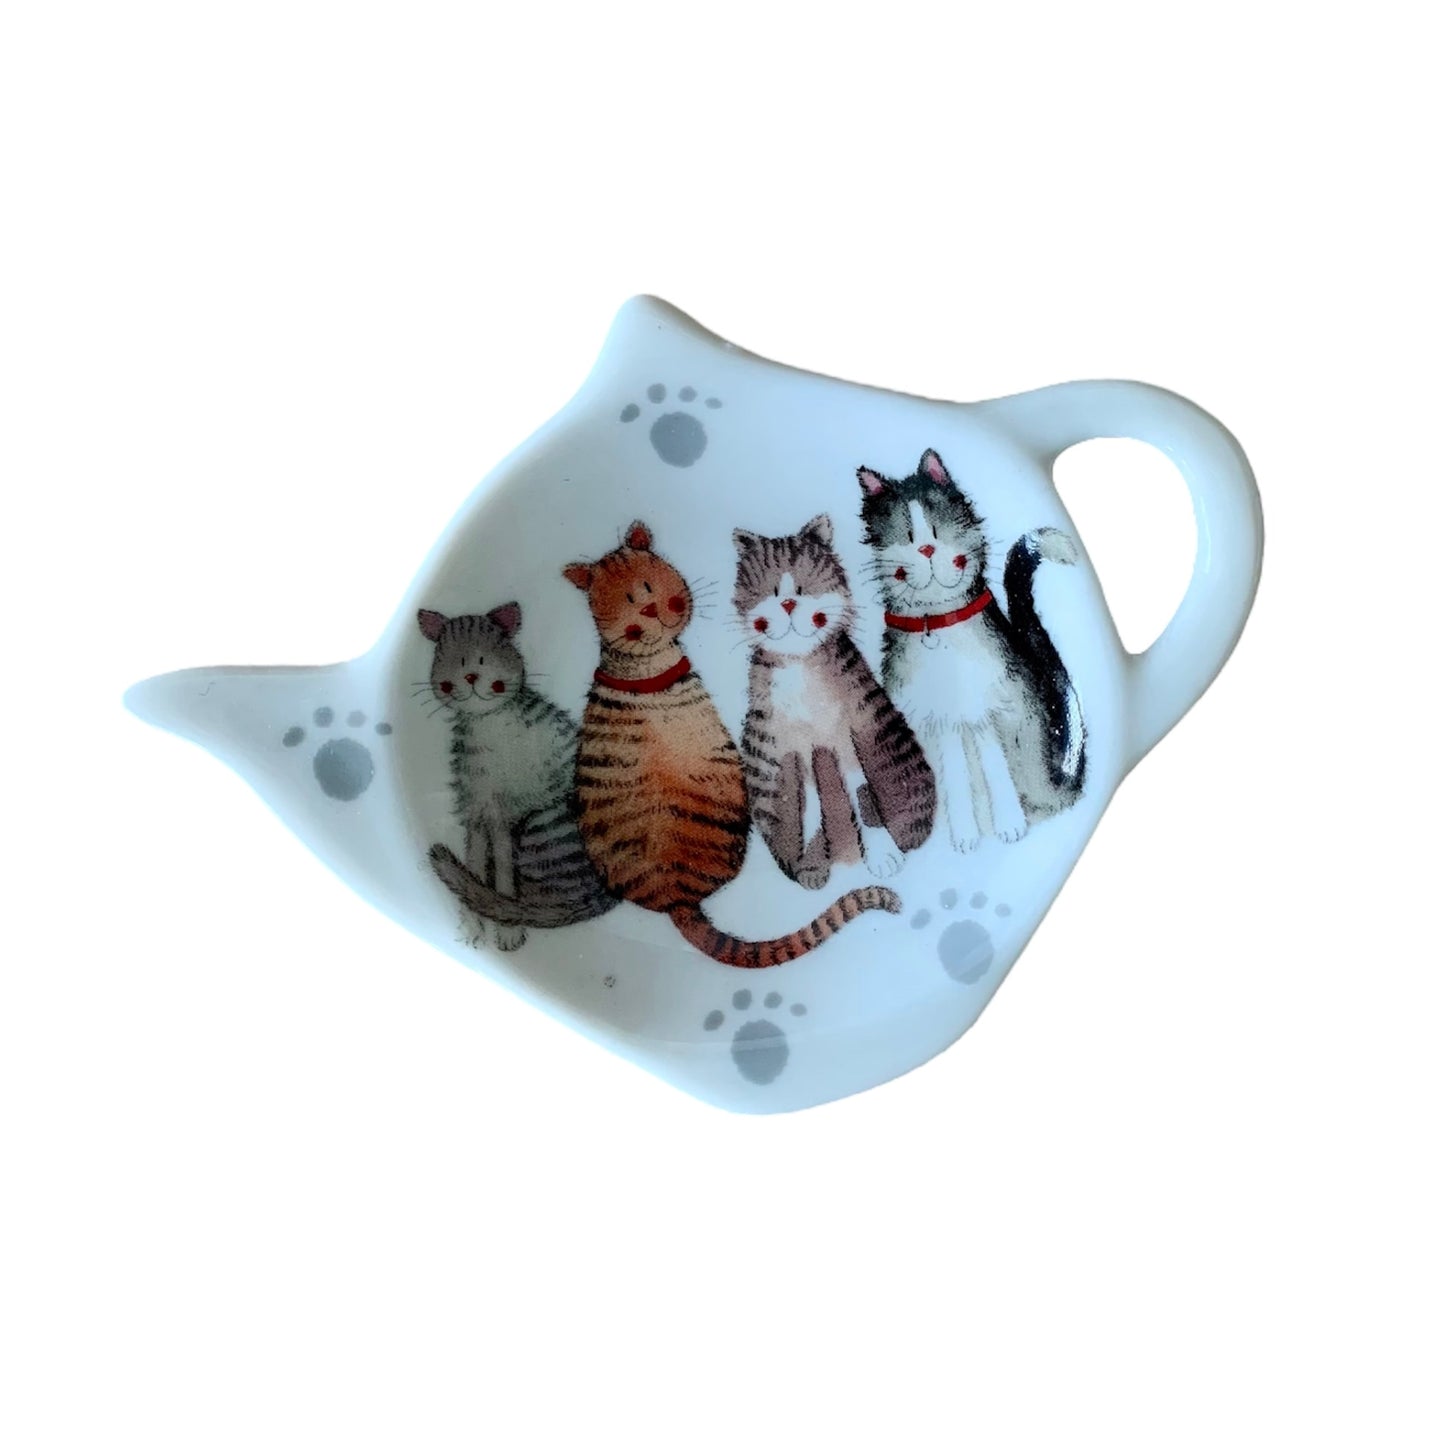 This Alex Clark teabag tidy is illustrated with a group of assassorted breeds of happy cats.  There is also a matching teapot & mugs in the same illustration.